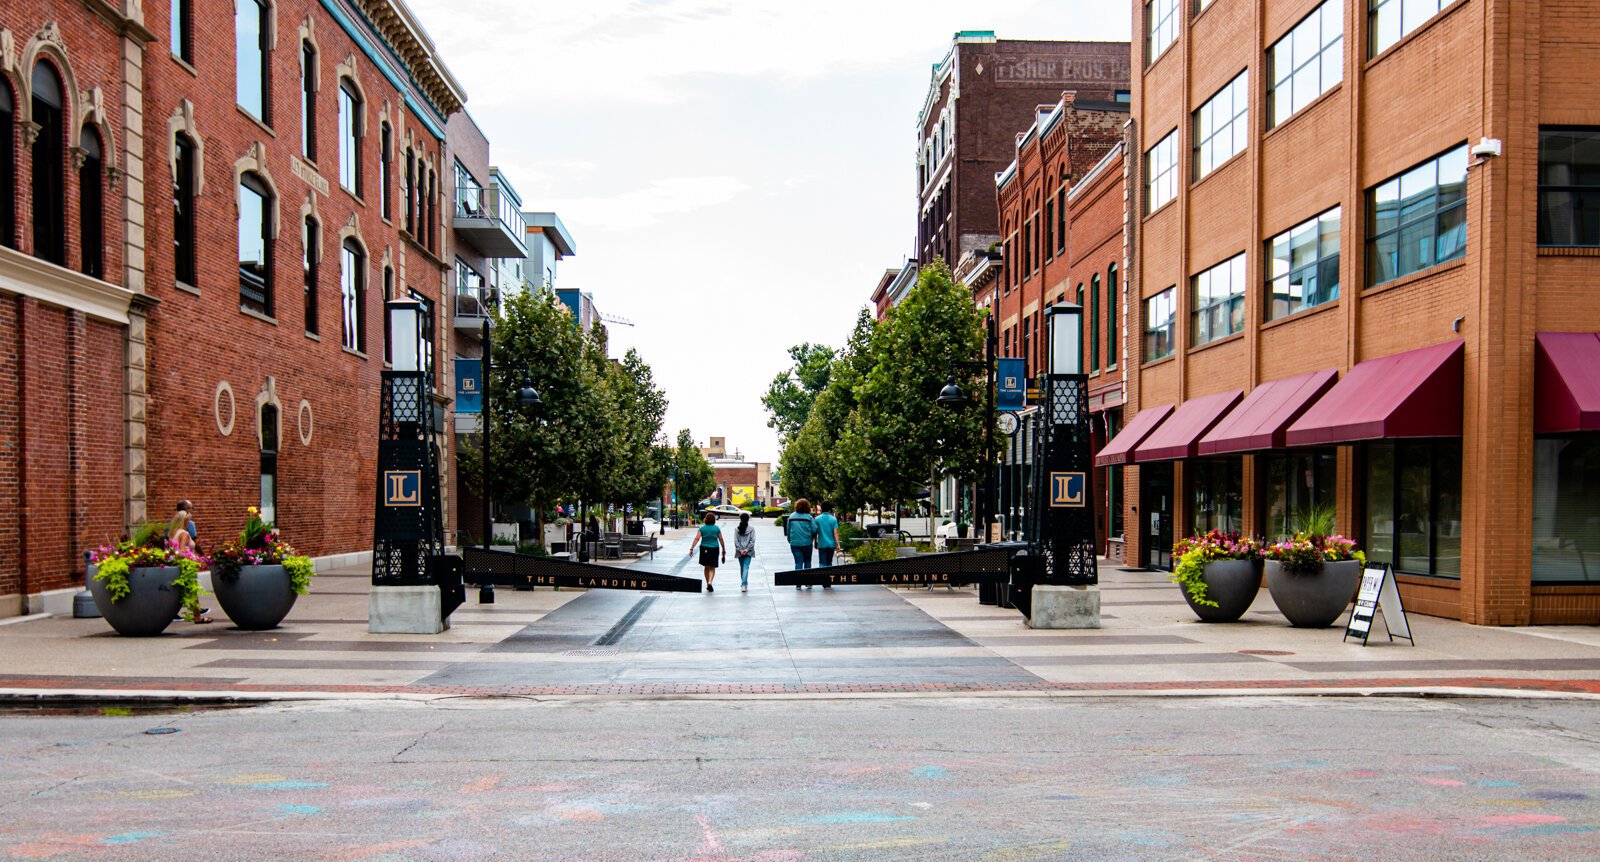 The Landing is one of Fort Wayne’s most iconic pedestrian-friendly blocks.